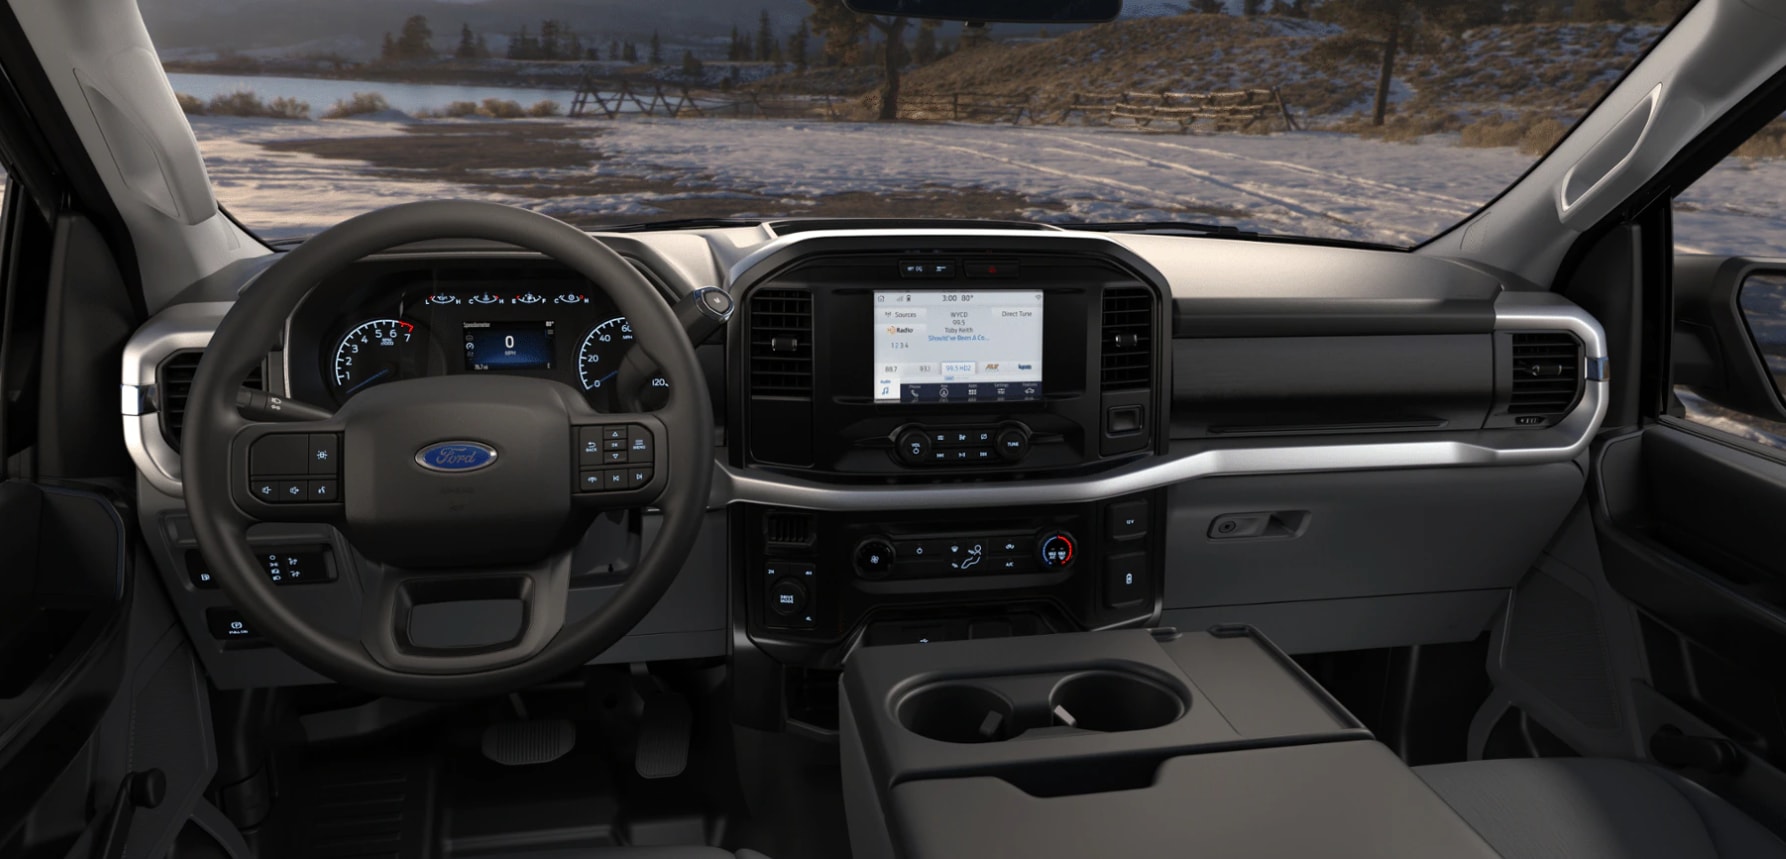 A view
of the 2023 Ford F150s drk gray luxurious interior with large center console
and drink holders, a dash highlight in brushed chrome housing a variety of tech
features including steering wheel convenience buttons, an electronic blue-lit
dash, navigation system, and radio.